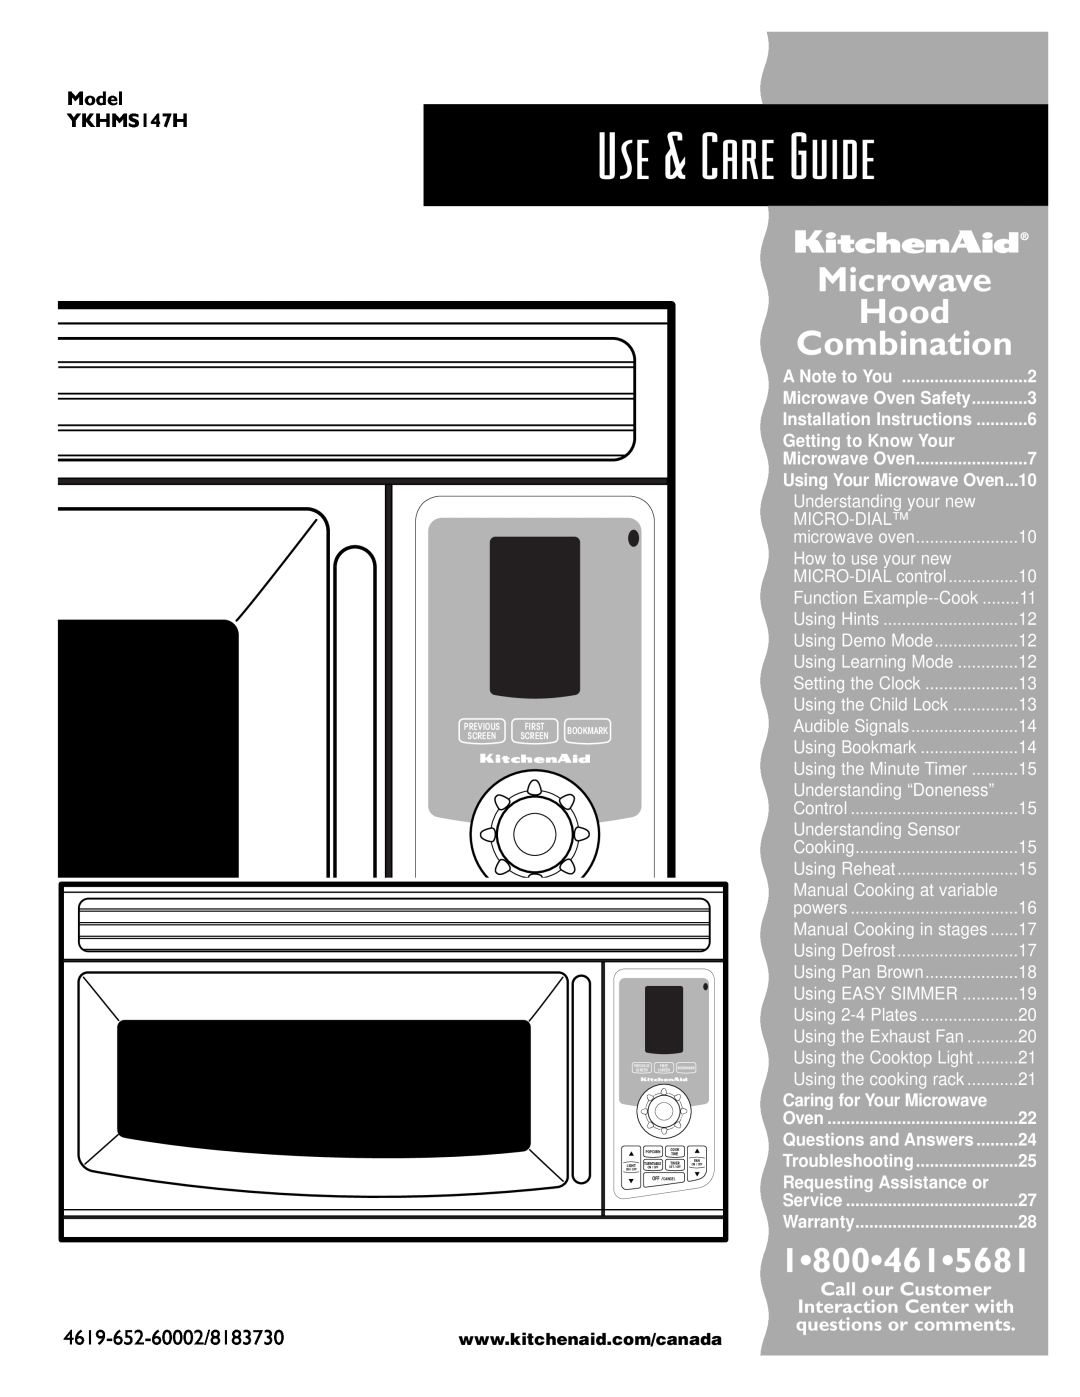 Whirlpool installation instructions Use & Care Guide, Microwave Hood Combination, 18004615681, Model YKHMS147H 